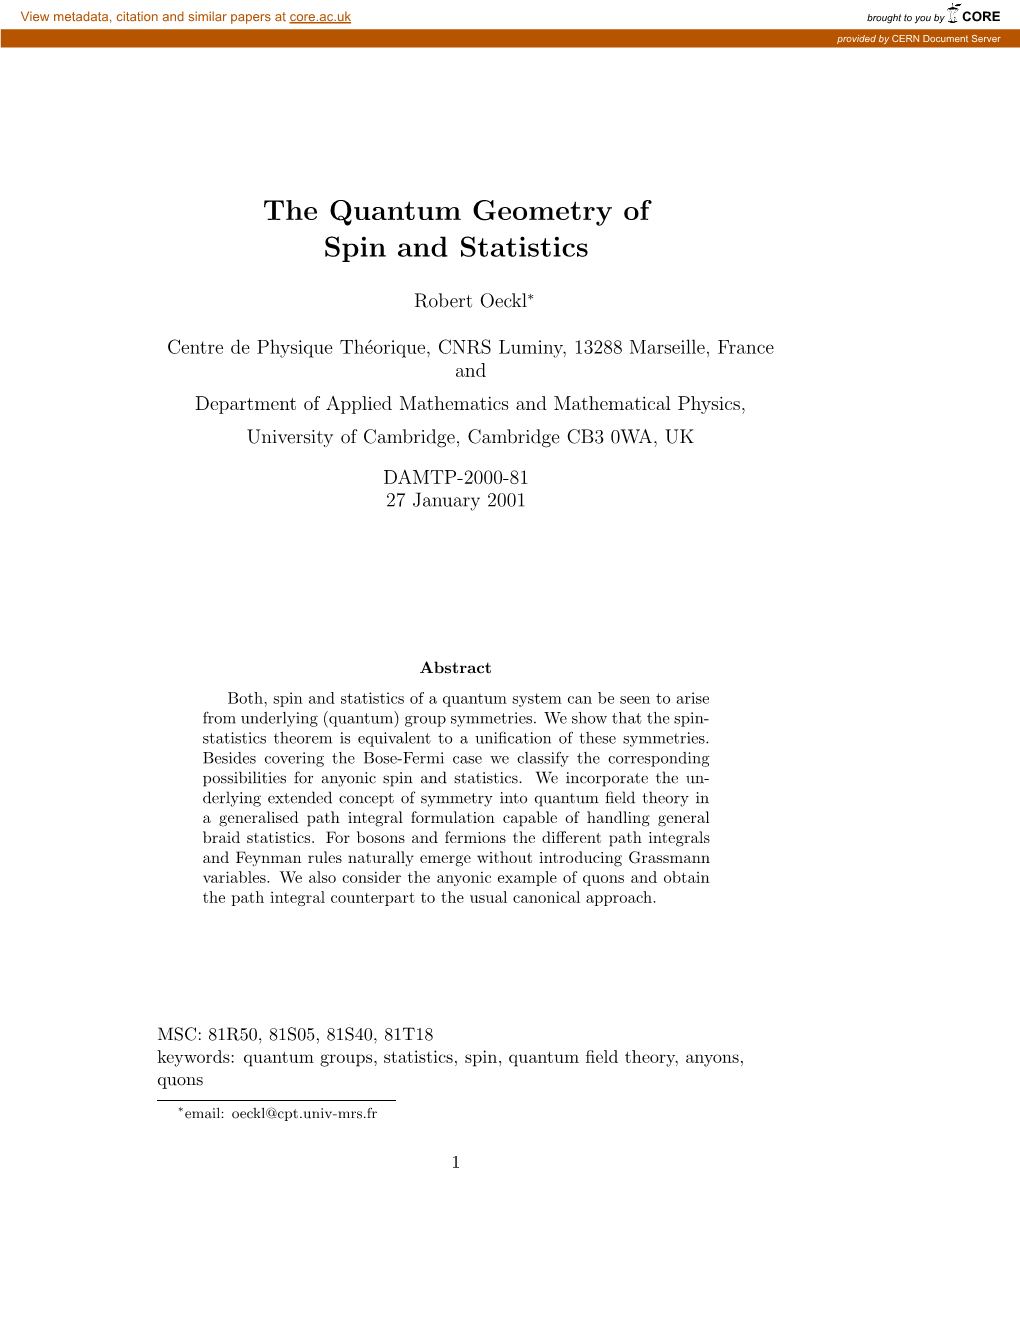 The Quantum Geometry of Spin and Statistics